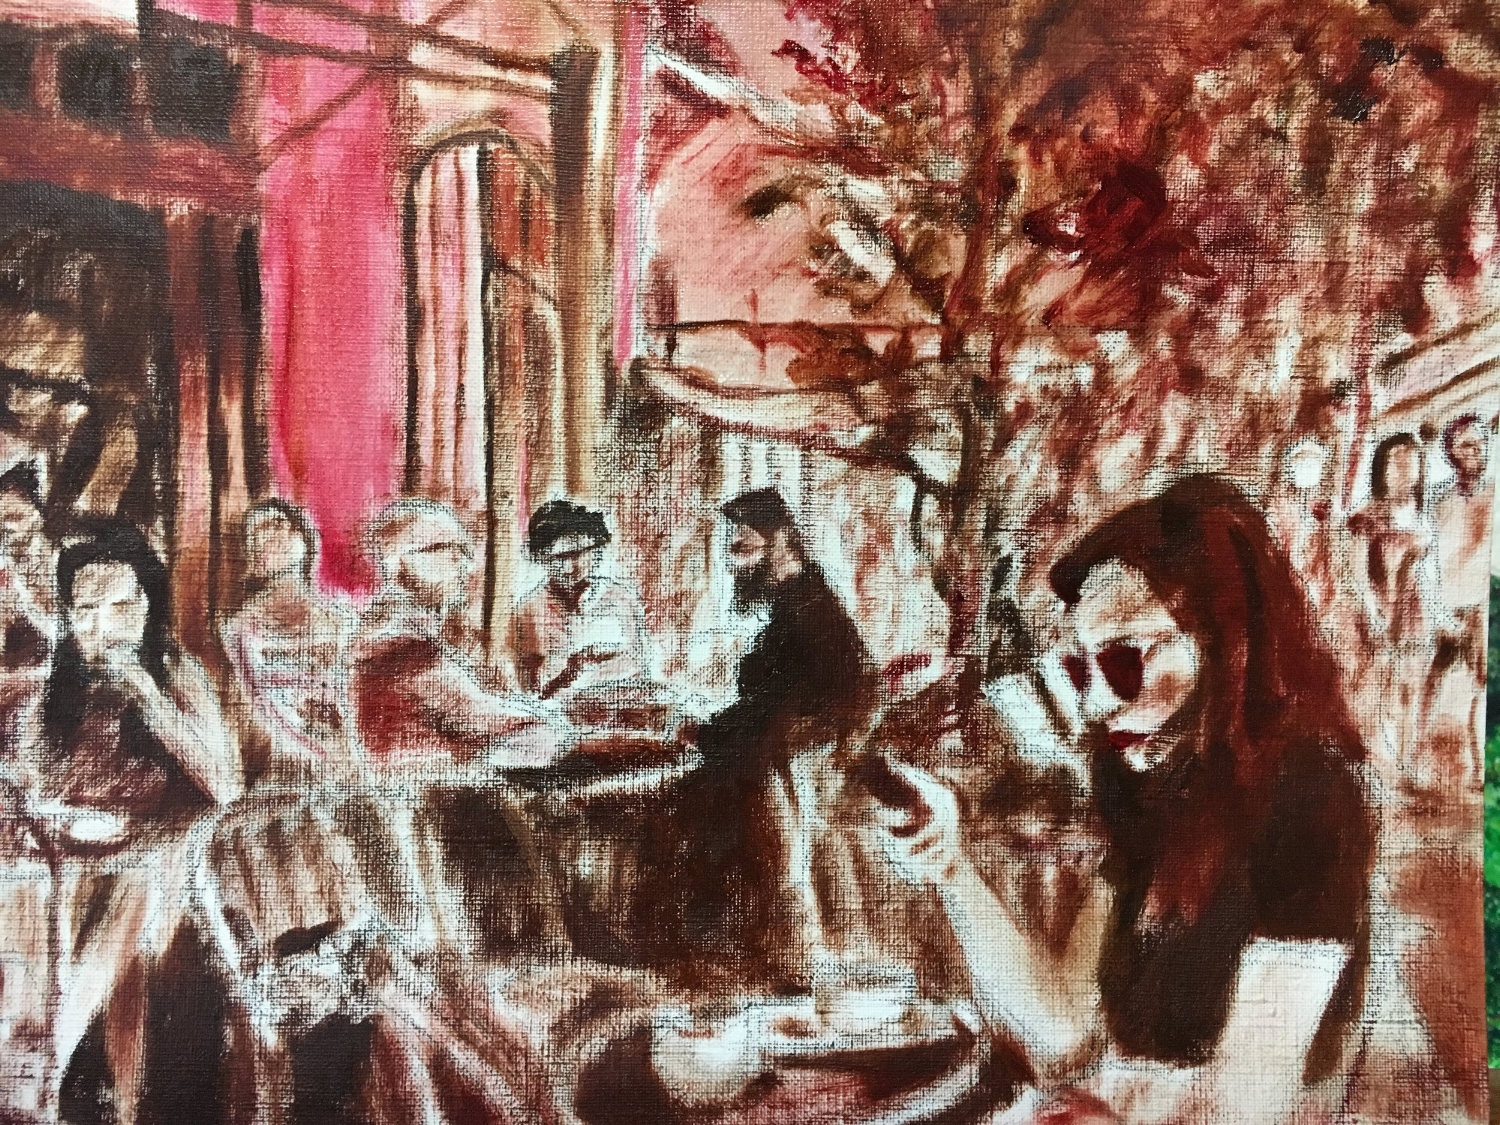 Underpainting of Study for Cafe Life at place Edmond Rostand